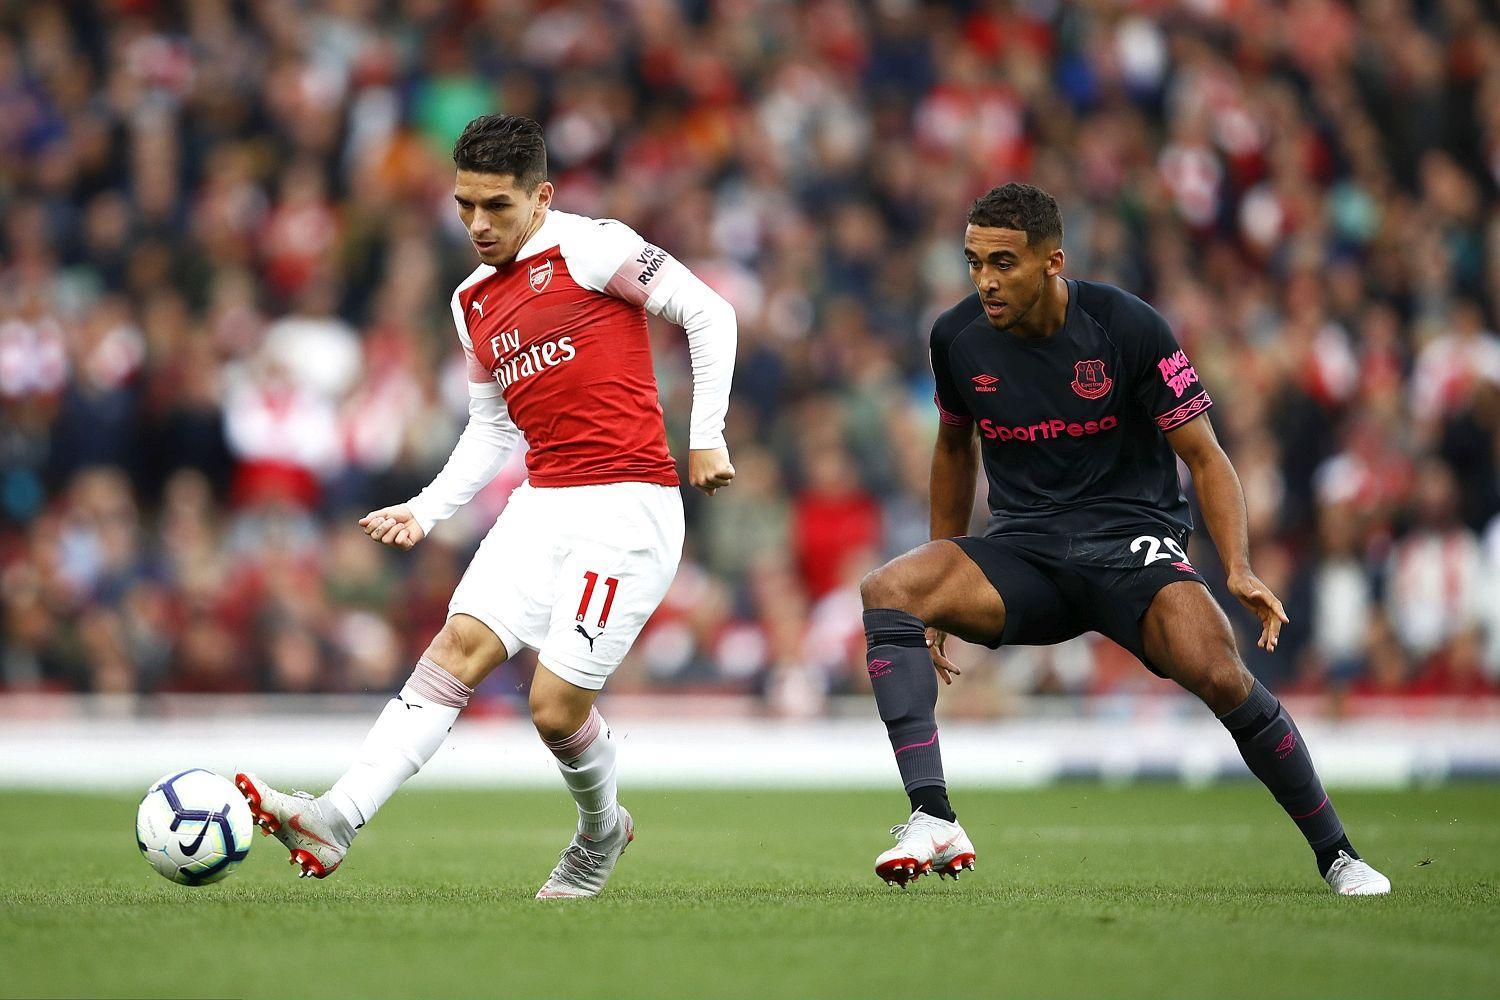 Lucas Torreira shows tenacity that Arsenal have been missing. Sport